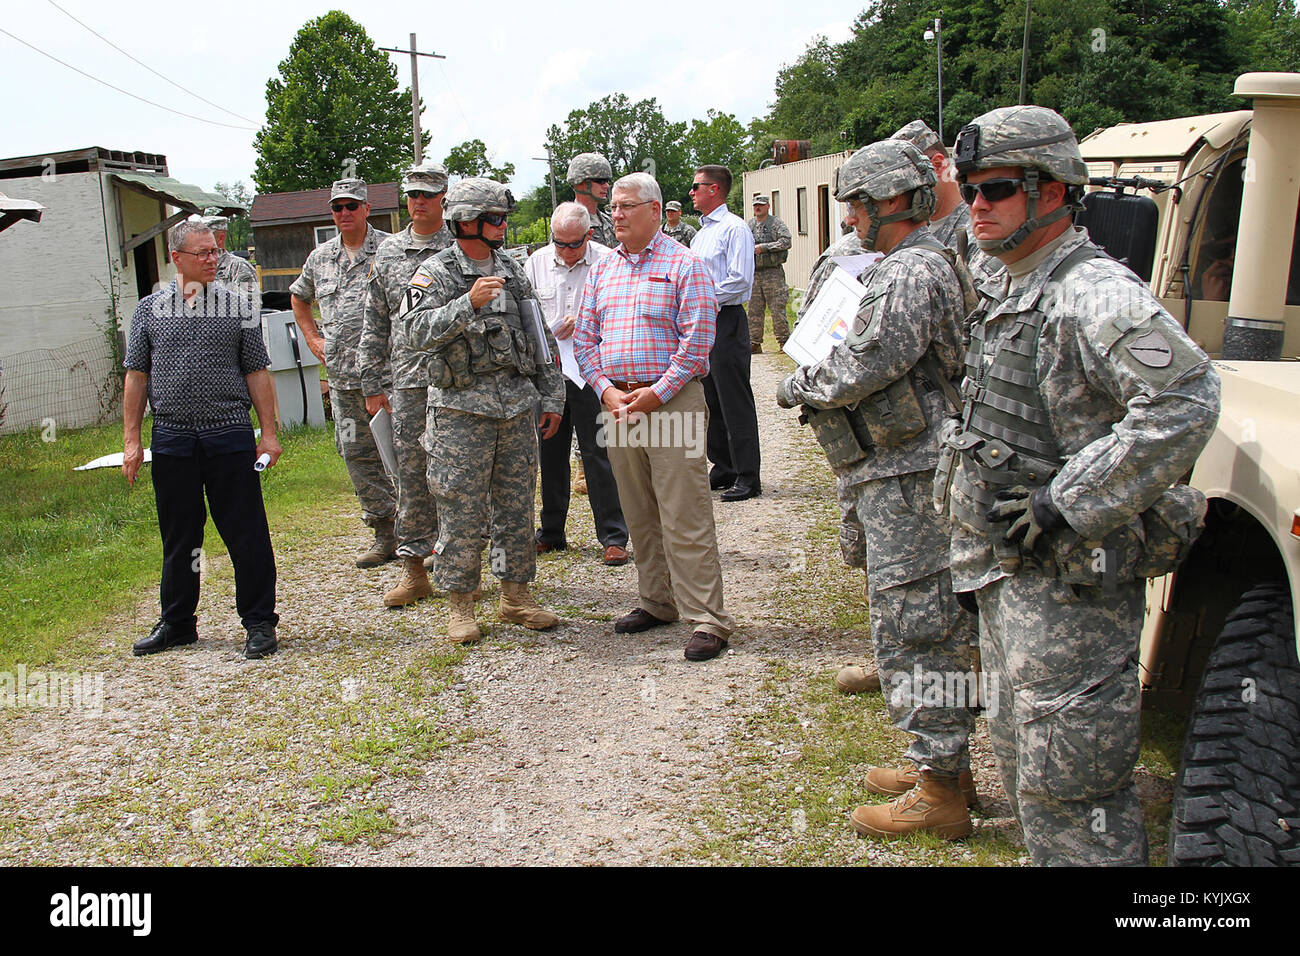 Retired Army Gen. Carter Ham and Members of the National Commission on the Future of the Army visit with Kentucky Guardsmen during a stop in Camp Atterbury, Ind., July 20, 2015. (U.S. Army National Guard photo by Staff Sgt. Scott Raymond) Stock Photo